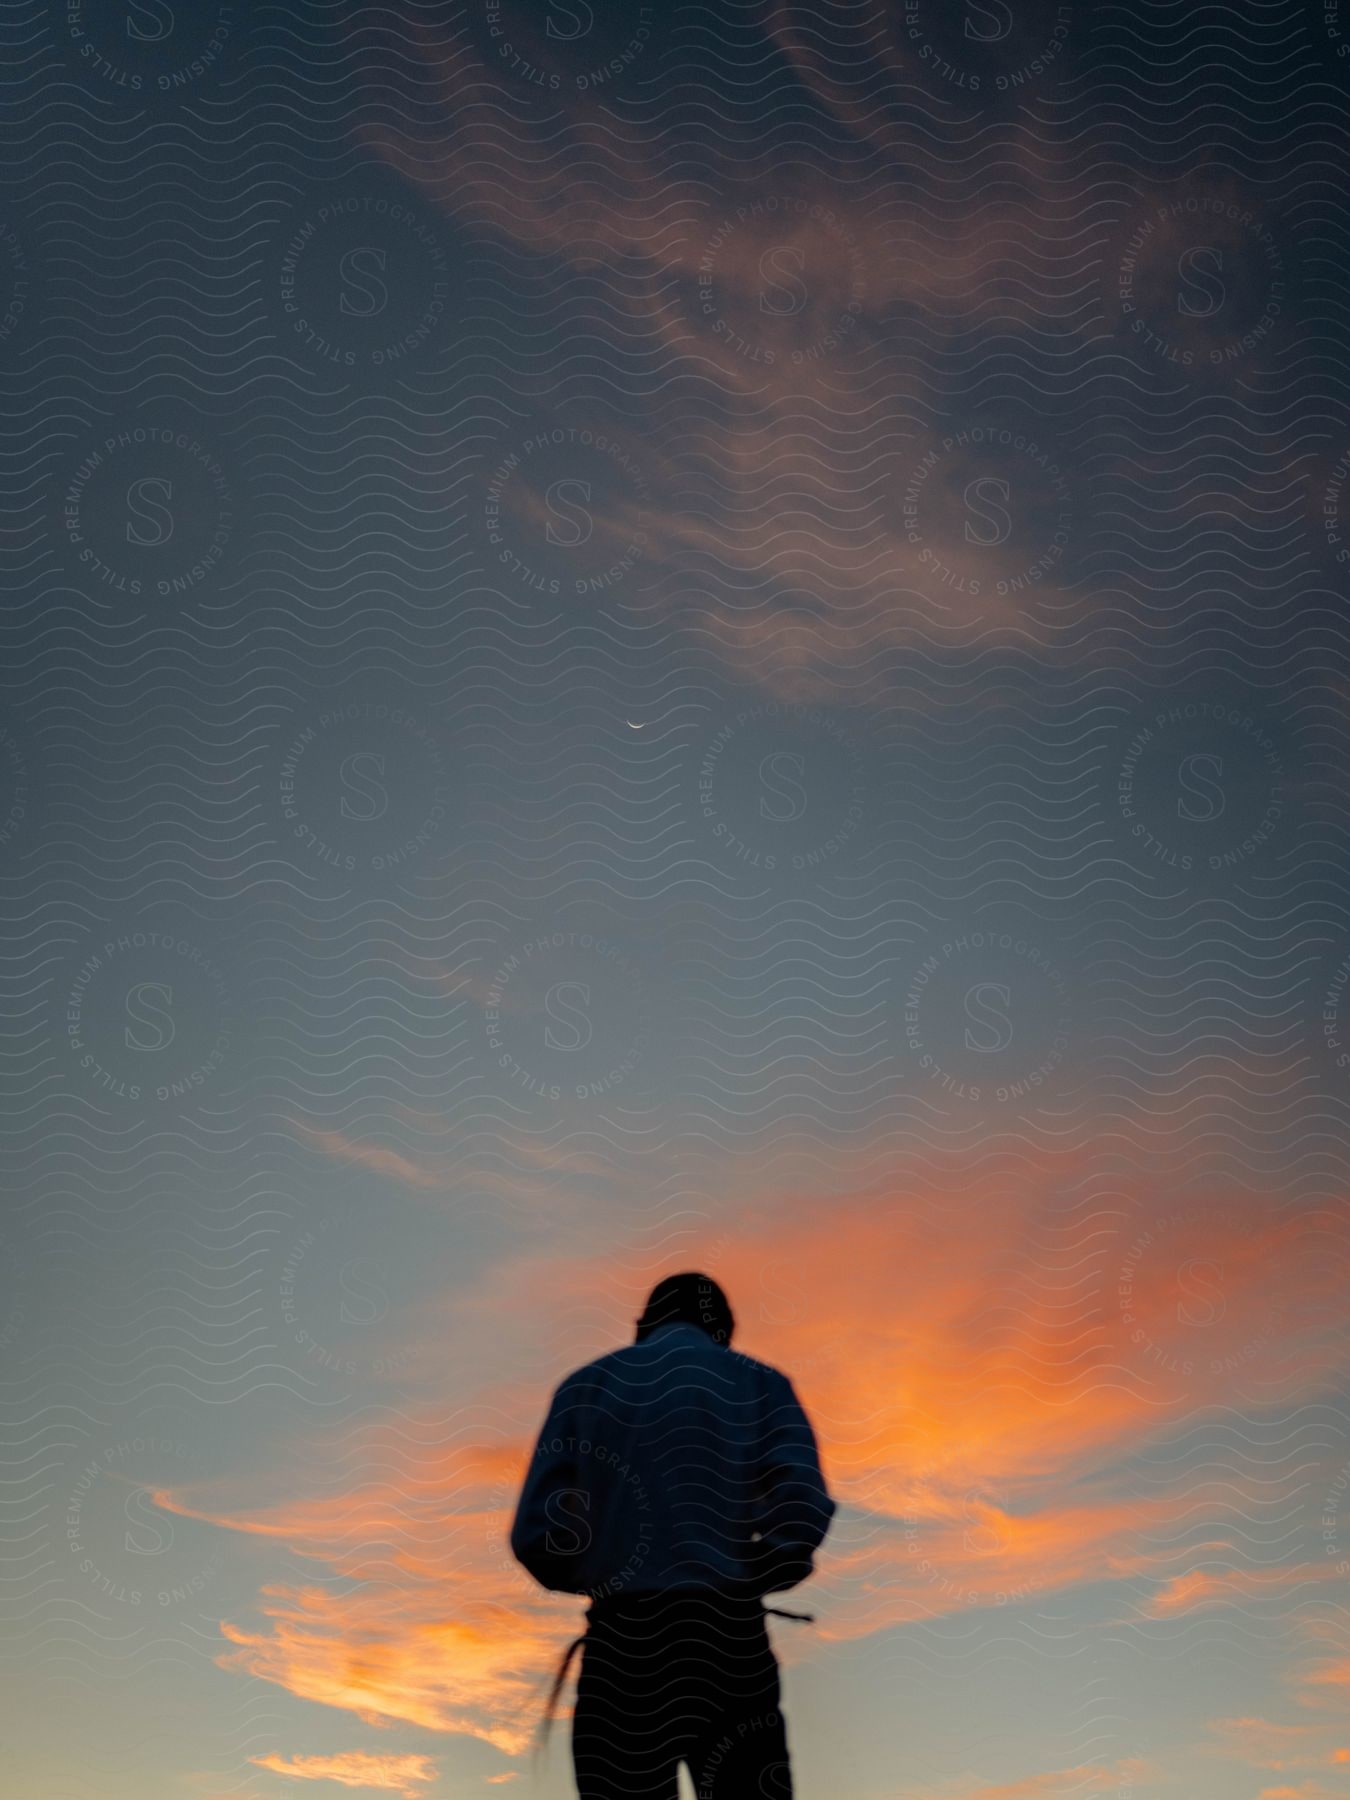 A man standing in nature during a sunset